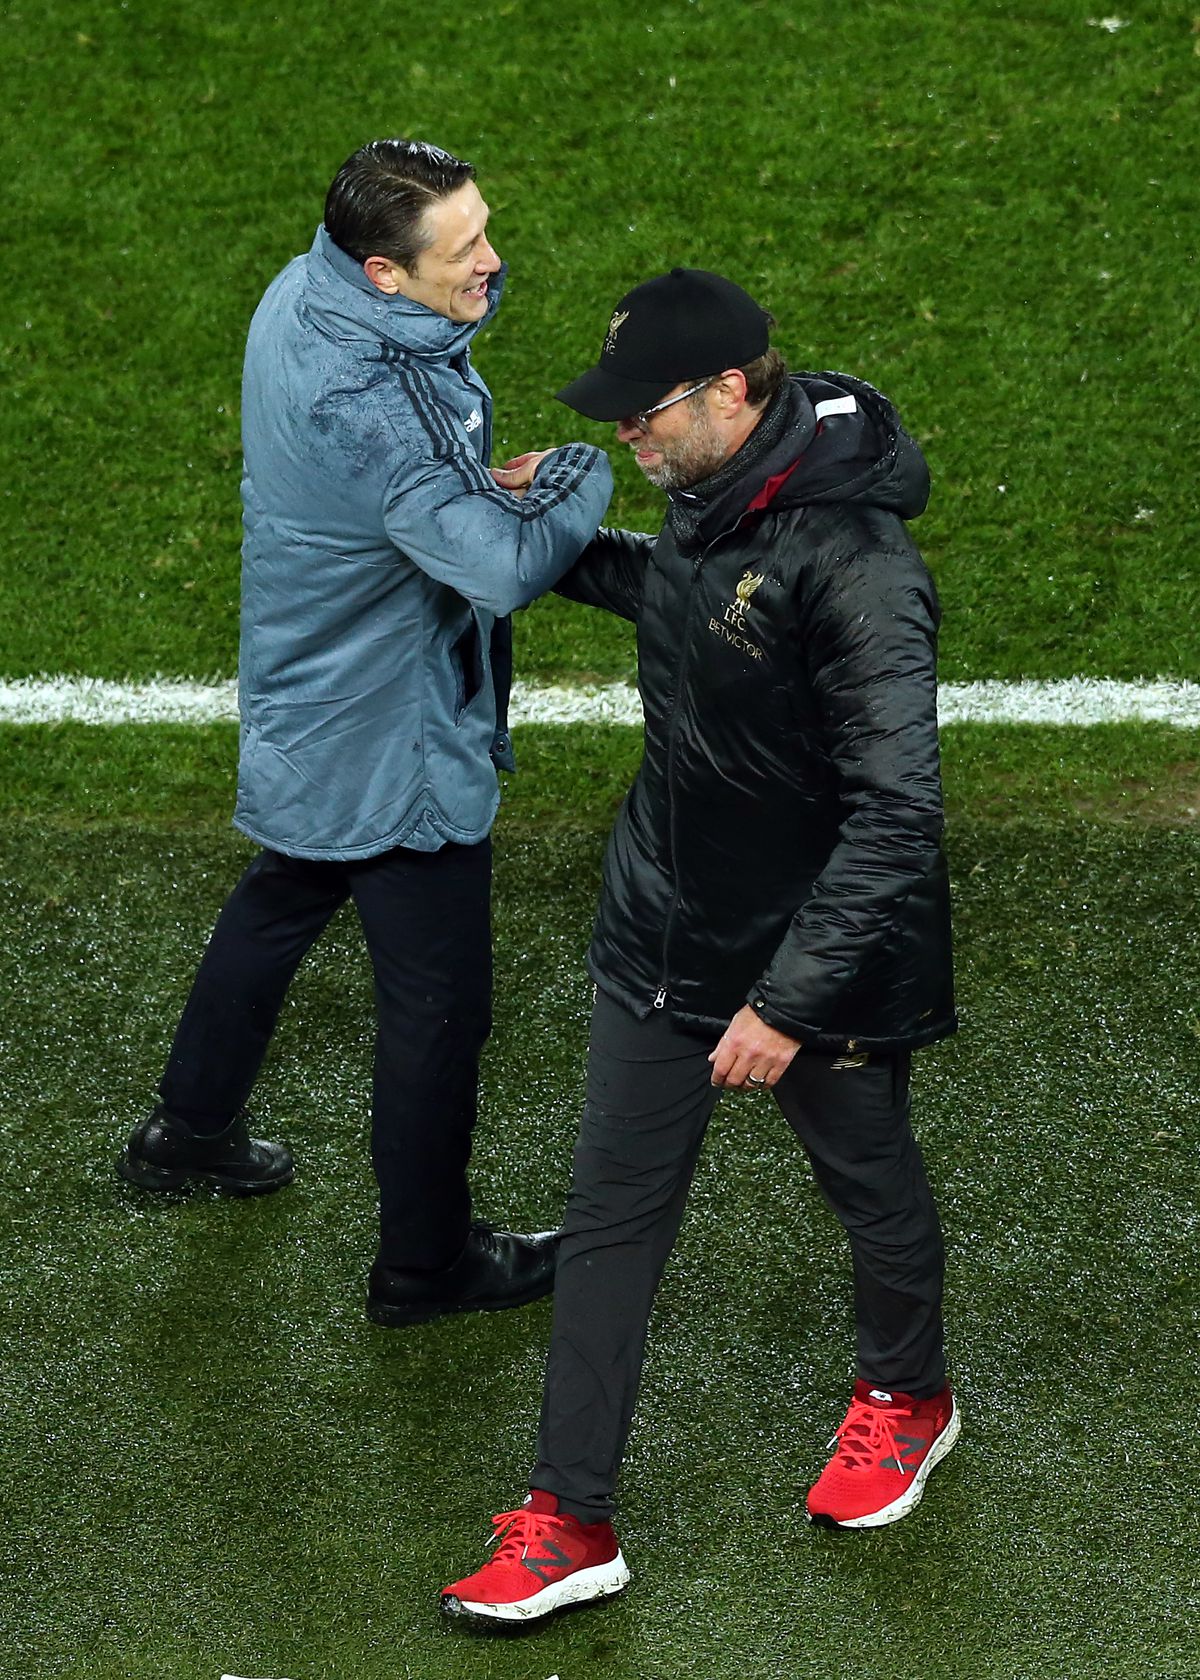 Liverpool v FC Bayern Muenchen - UEFA Champions League Round of 16: First Leg
LIVERPOOL, ENGLAND - FEBRUARY 19: Liverpool manager Jurgen Klopp and FC Bayern Muenchen manager Niko Kovac shake hands at the final whistle during the UEFA Champions League Round of 16 First Leg match between Liverpool and FC Bayern Muenchen at Anfield on February 19, 2019 in Liverpool, England.